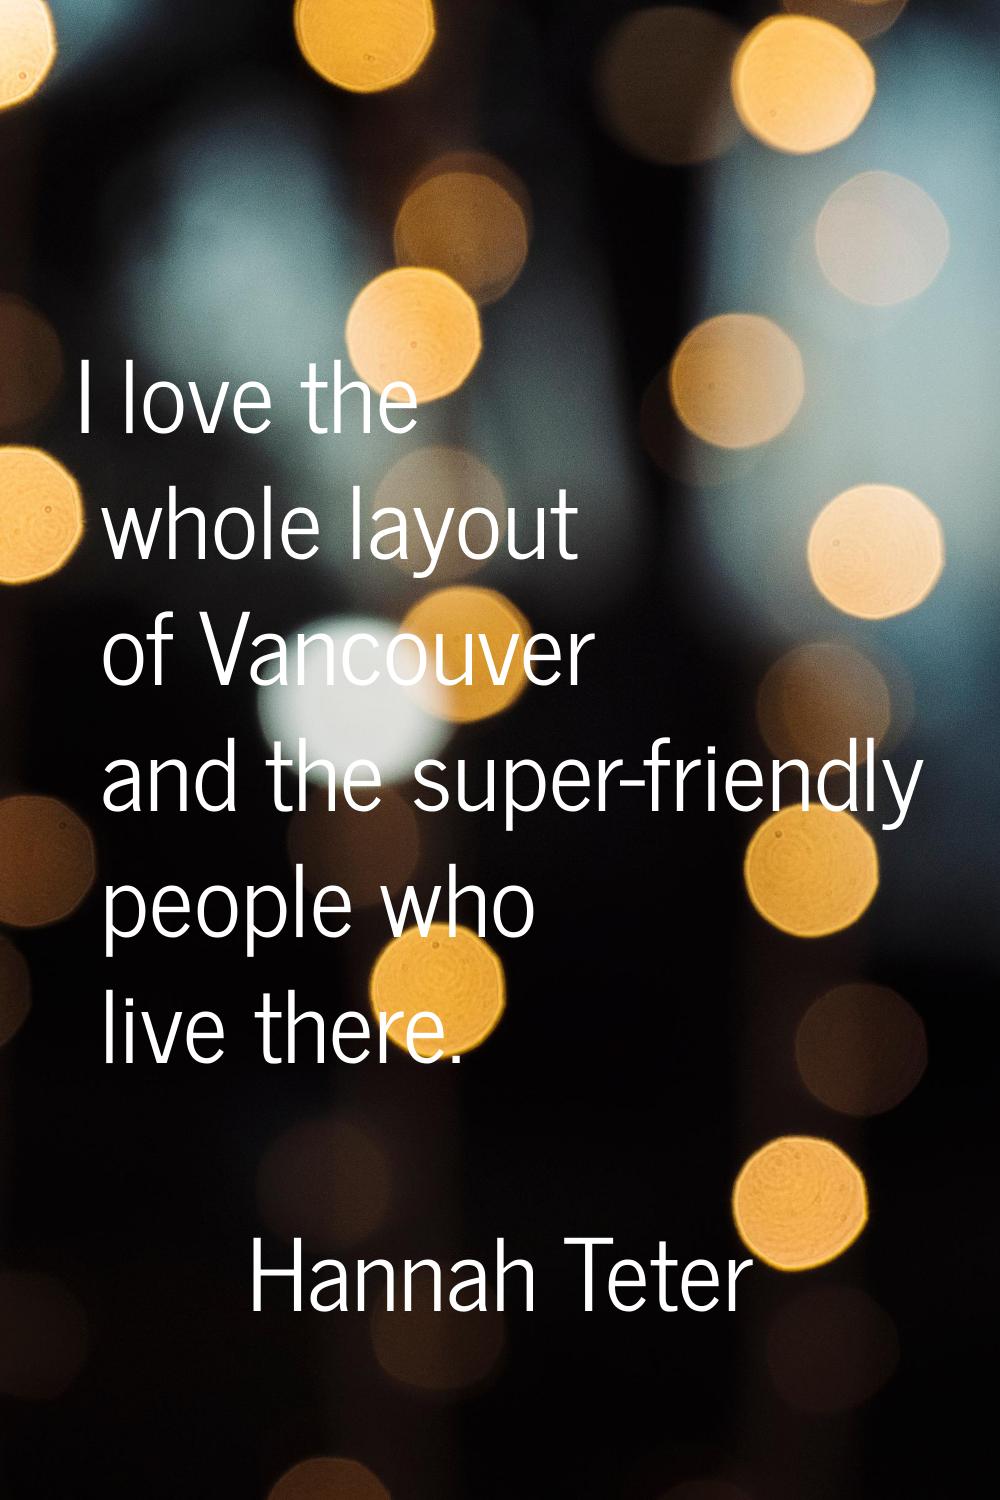 I love the whole layout of Vancouver and the super-friendly people who live there.